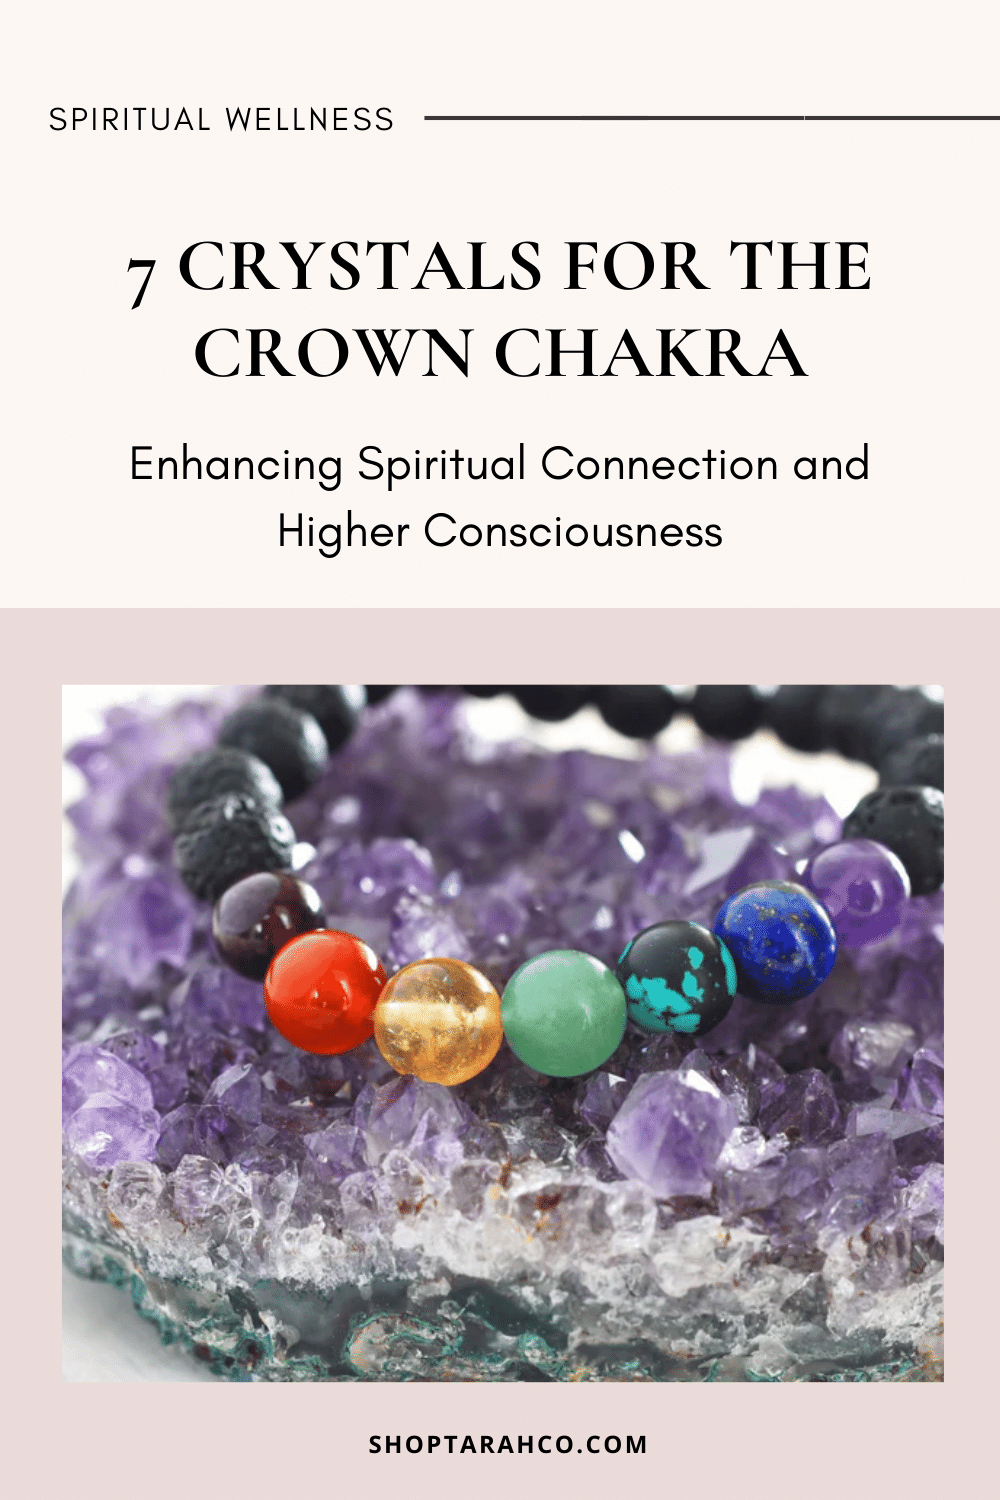 Tarah Co Crystals For the Crown Chakra Illuminating the Divine: The...